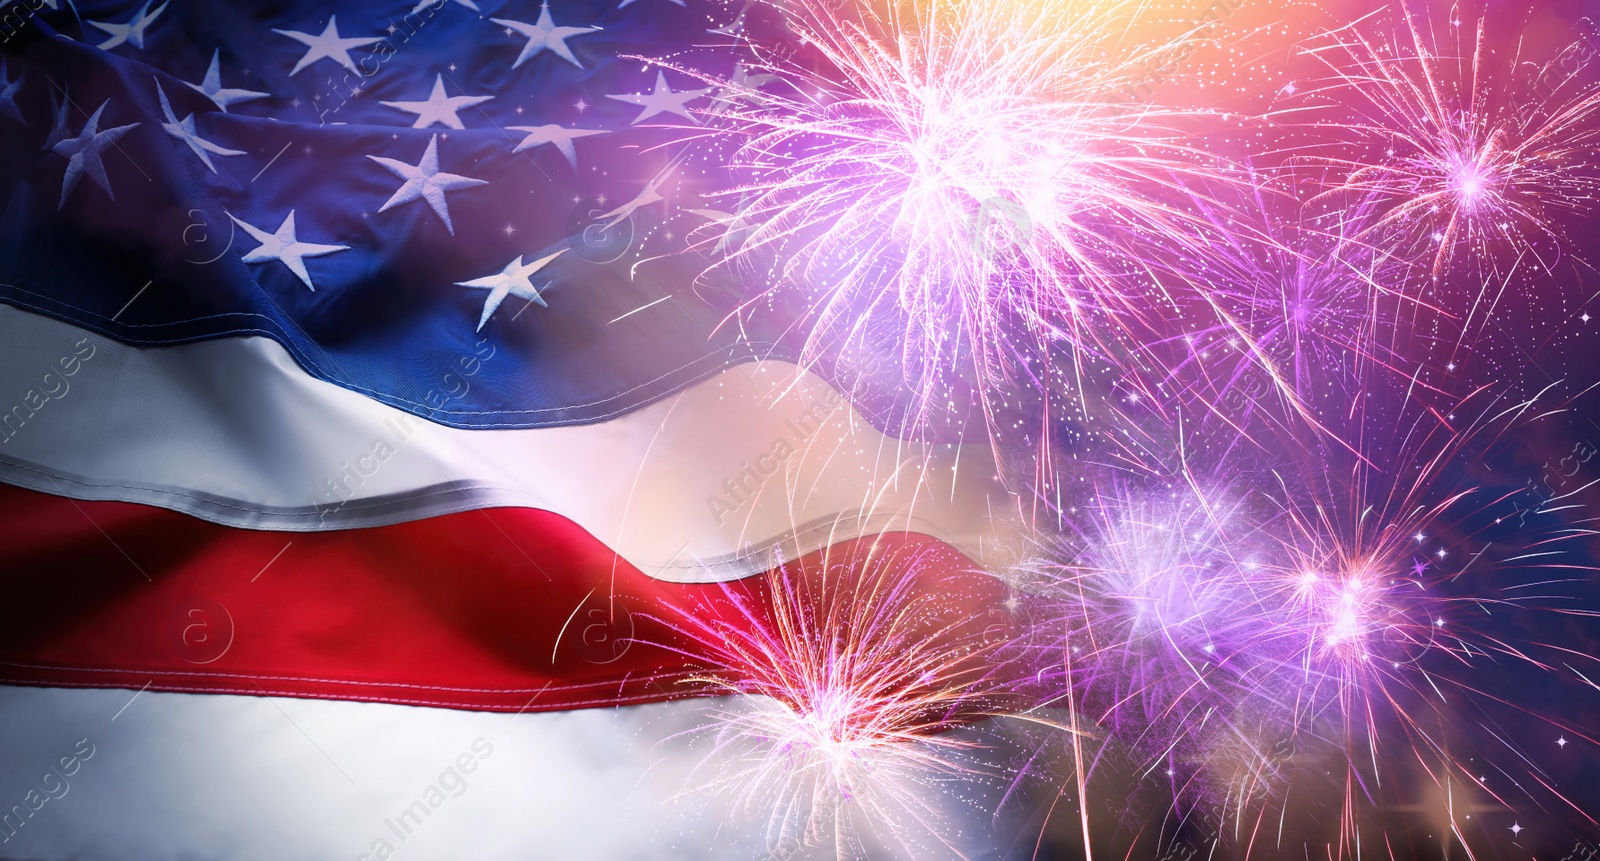 Image of American flag and fireworks, banner design. Independence Day of USA